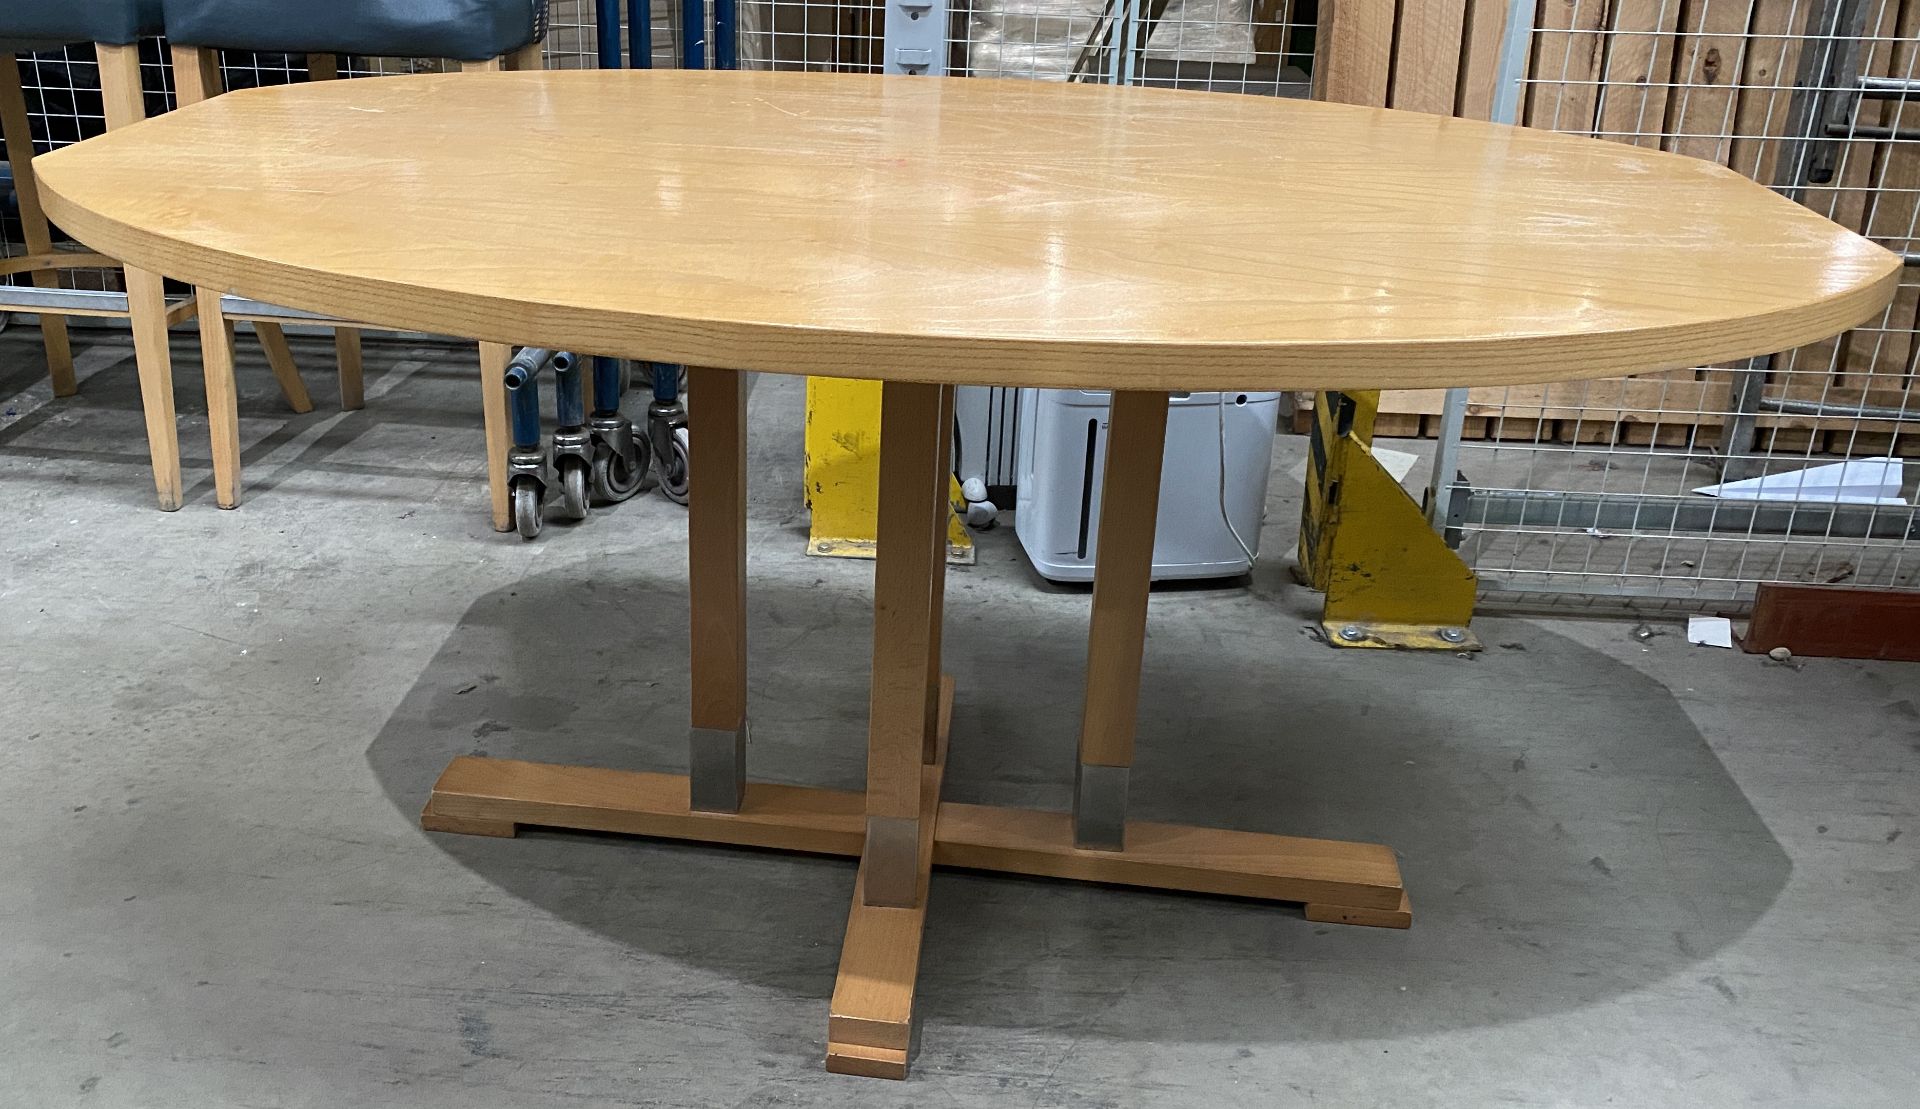 2 x Oval Oak Laminate Square Ended Dining Tables on 4 Leg Base - 100cm x 145cm - Image 2 of 2